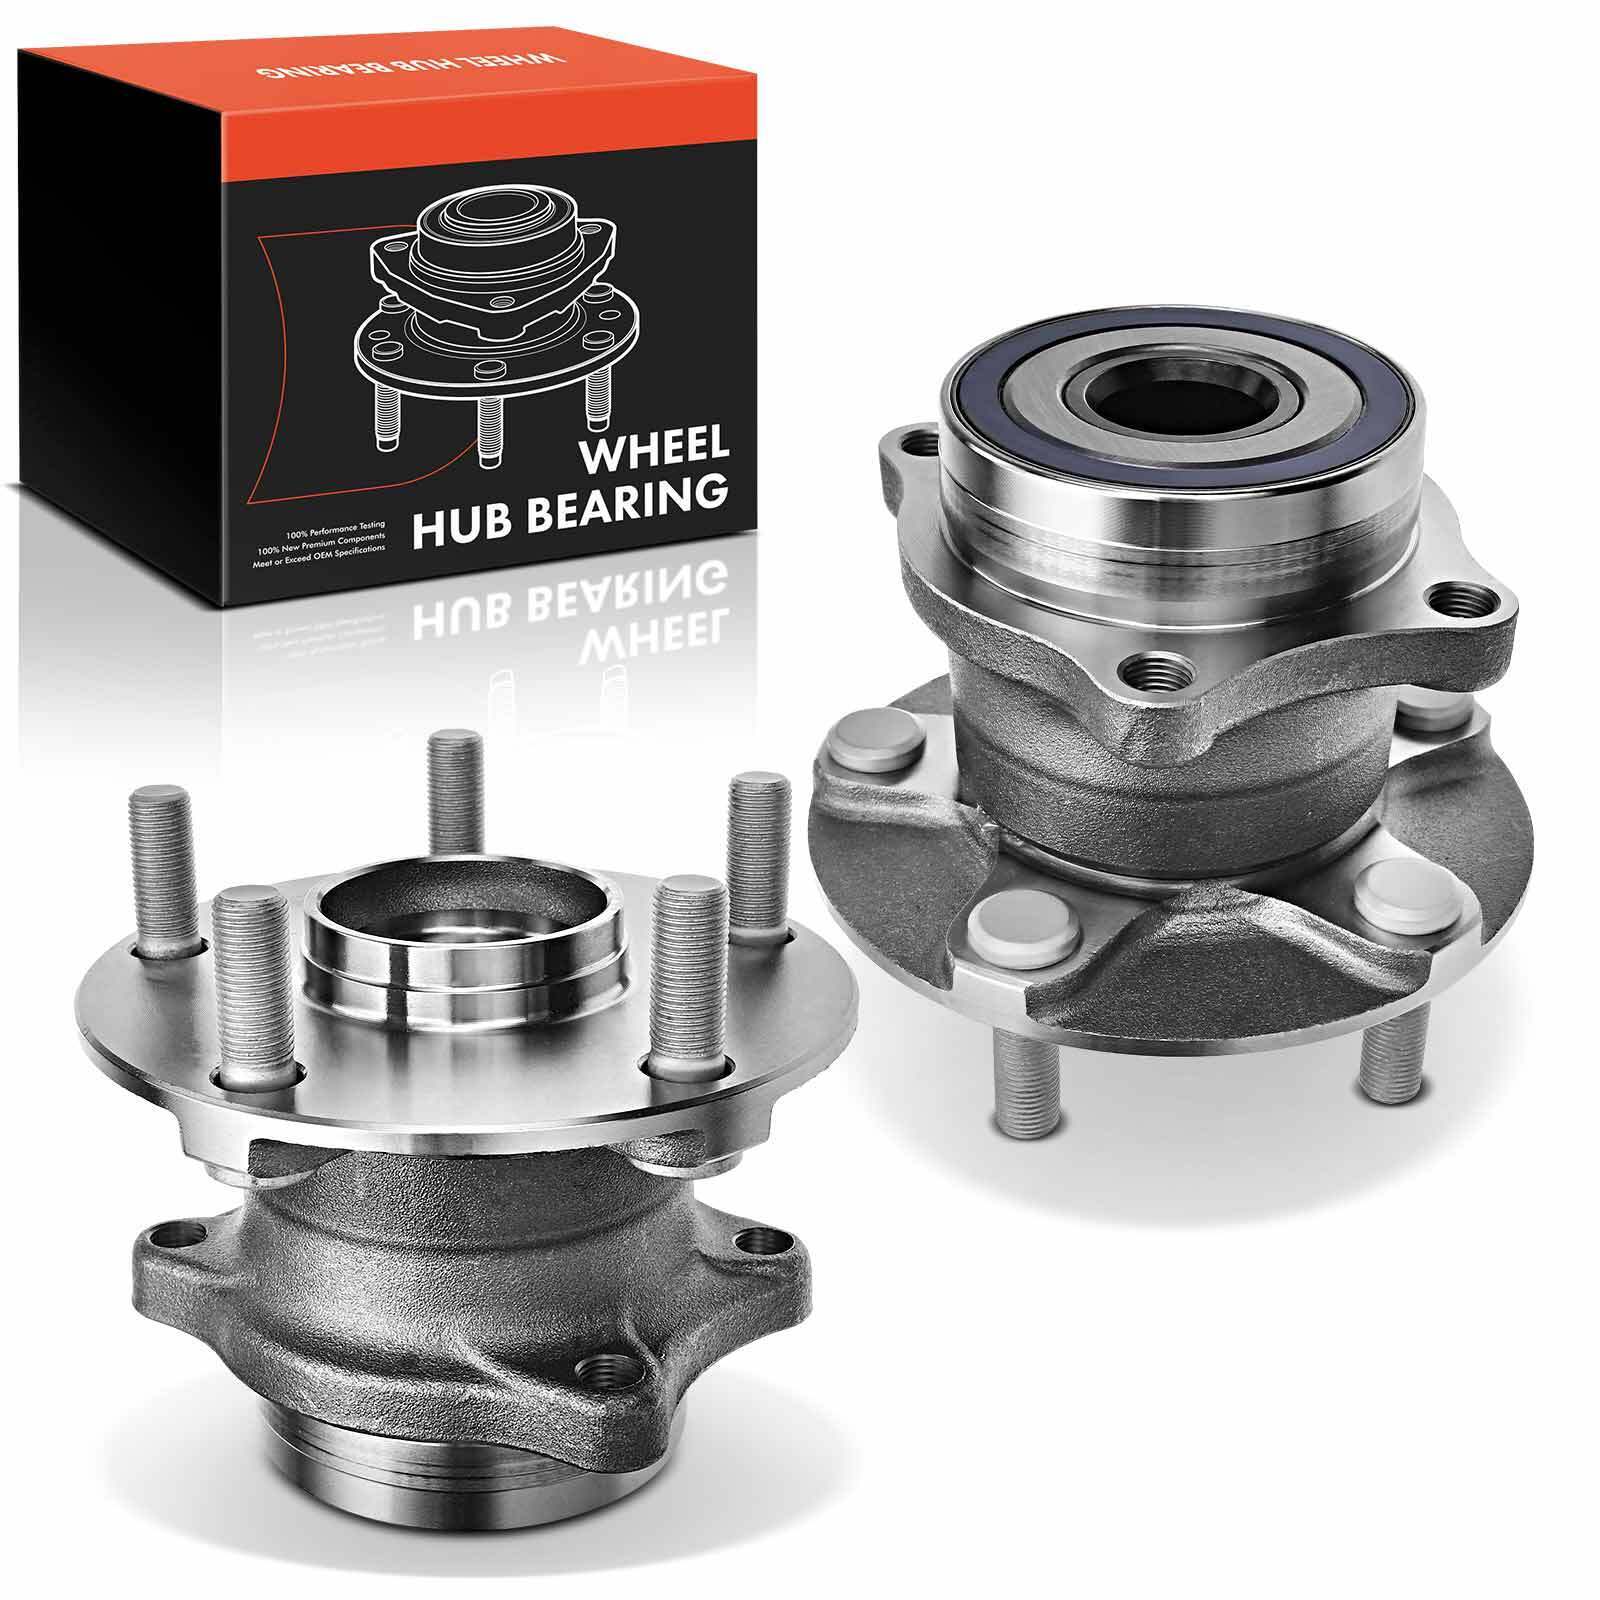 2x Rear Sides Wheel Hub Bearing Assembly for Subaru Legacy Outback Forester WRX